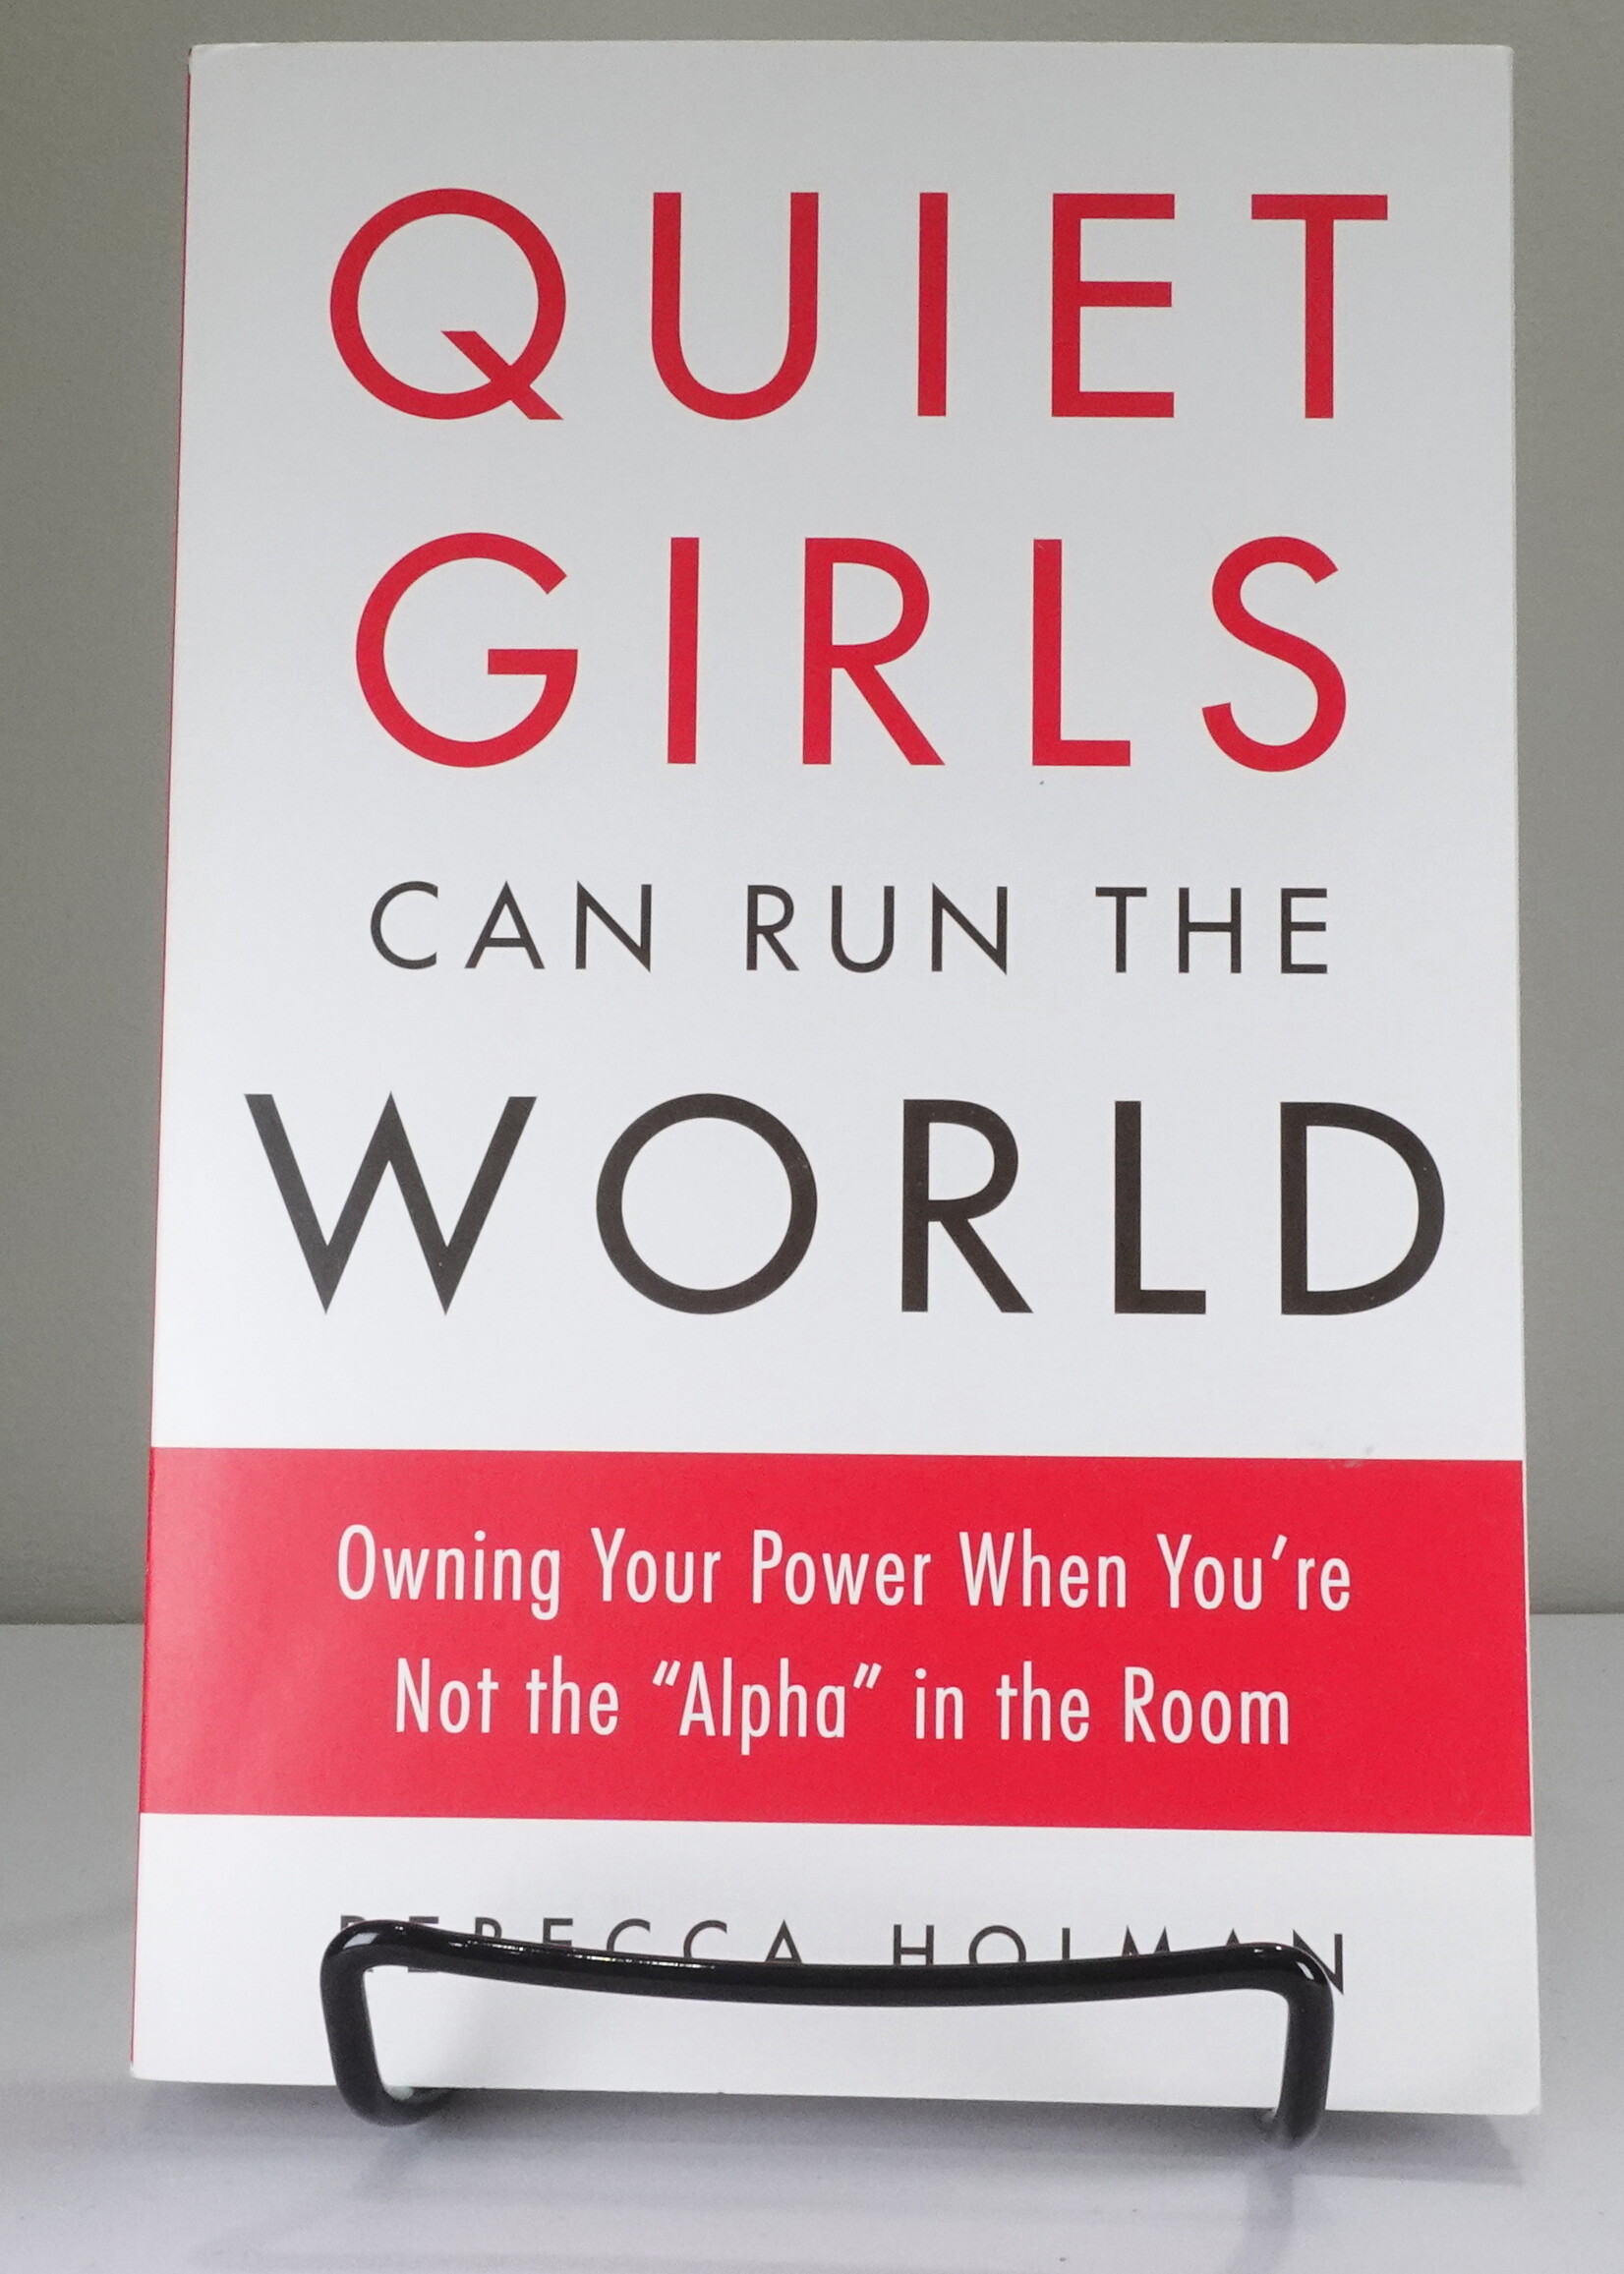 TarcherPerigee Quiet Girls Can Run the World: Owning Your Power When You're Not the Alpha in the Room (u)